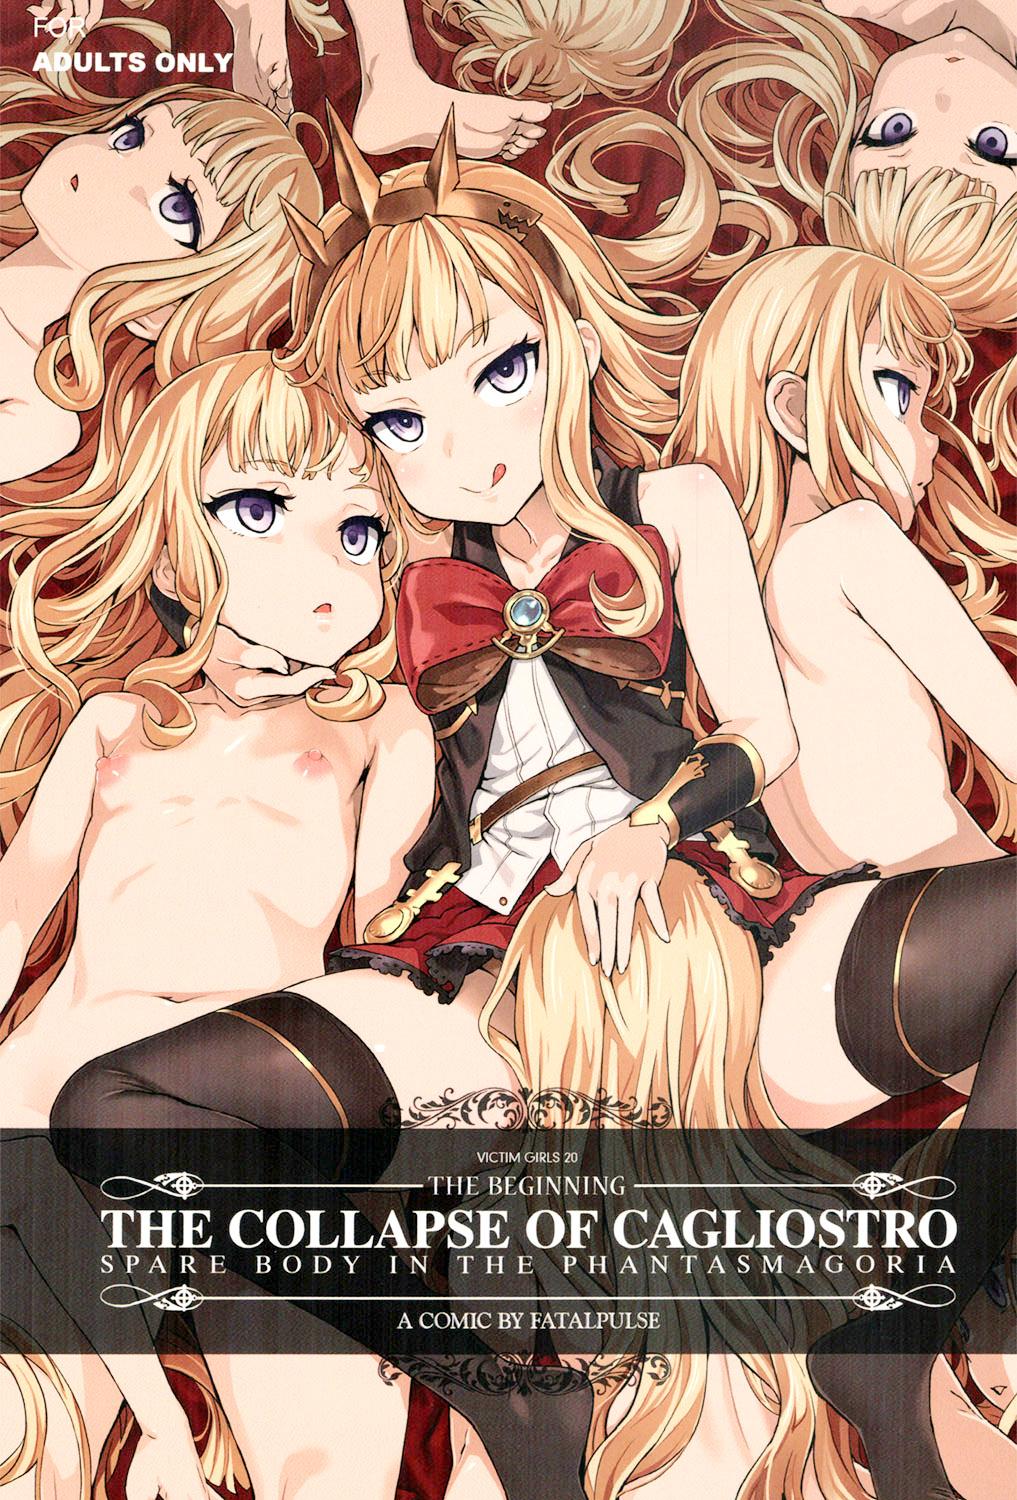 Webcamchat Victim Girls 20 THE COLLAPSE OF CAGLIOSTRO - Granblue fantasy Horny Slut - Page 2